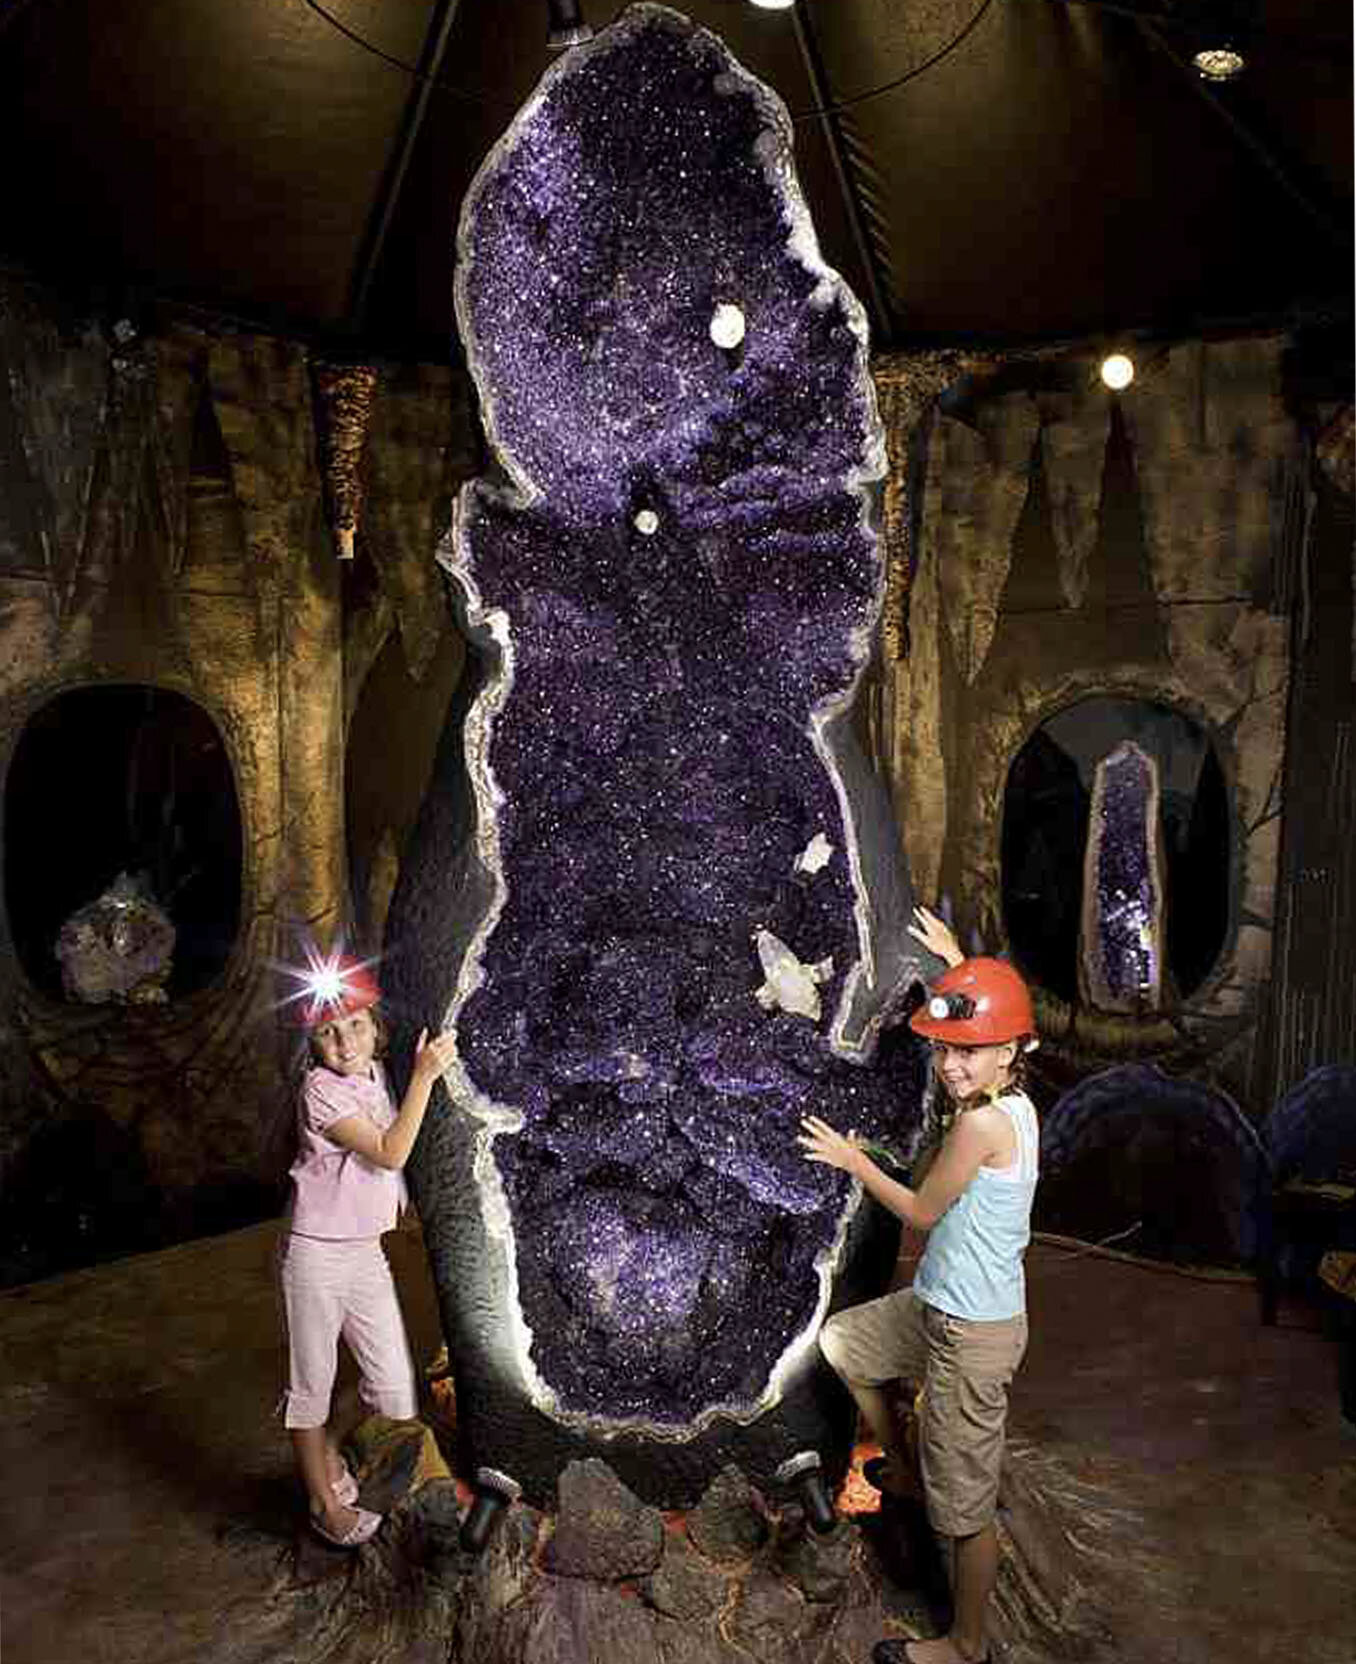 Empress of Uruguay geode -the largest amethyst geode in the world